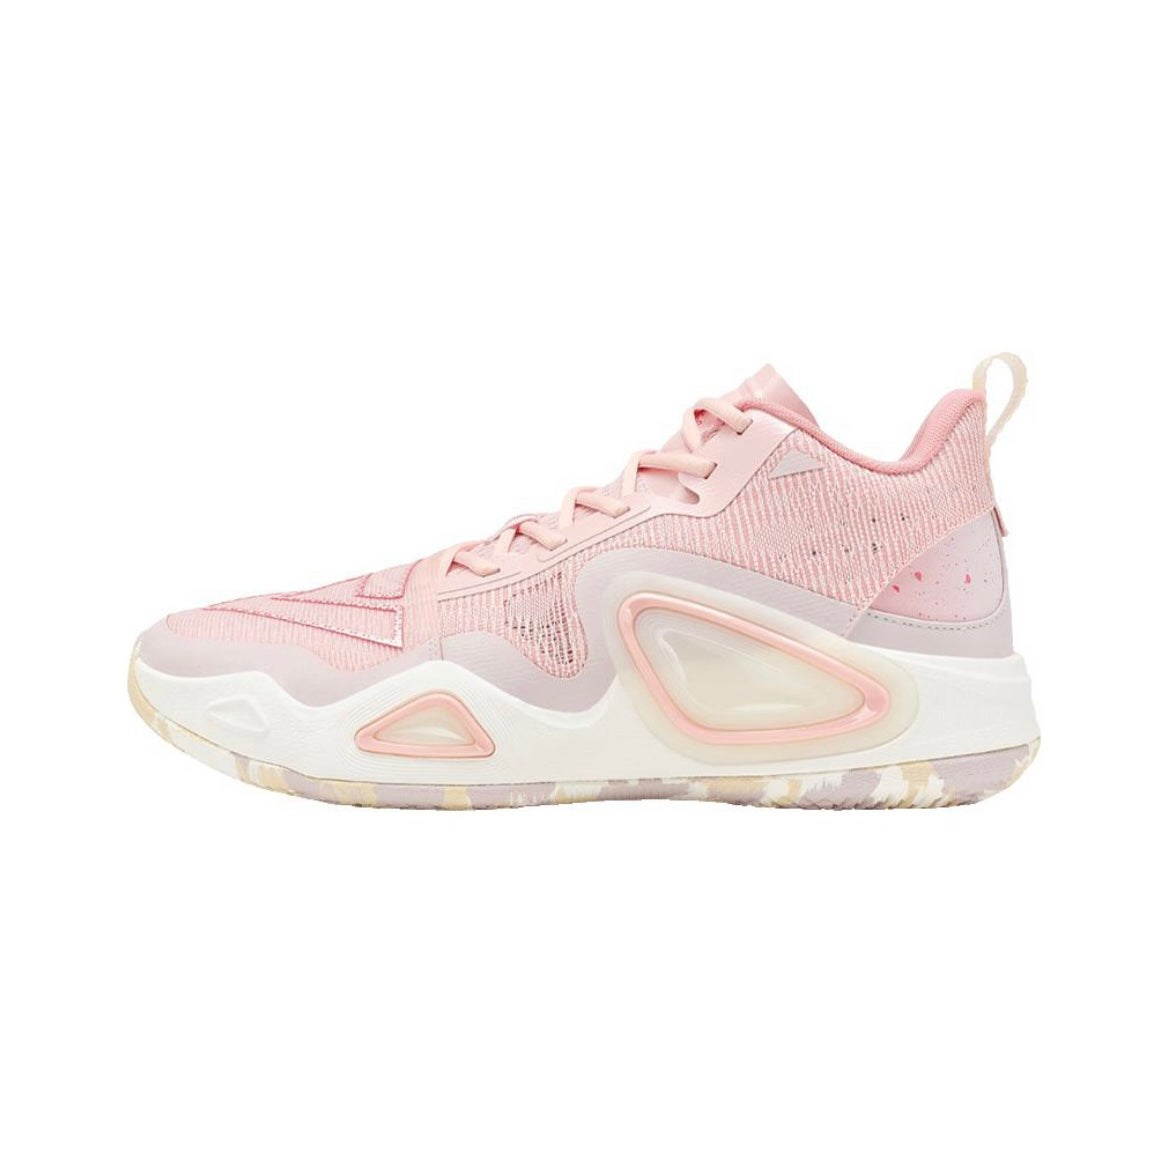 Peak Taichi Surging Big Triangle 2.0 Low Basketball Shoes - Cherry blossoms